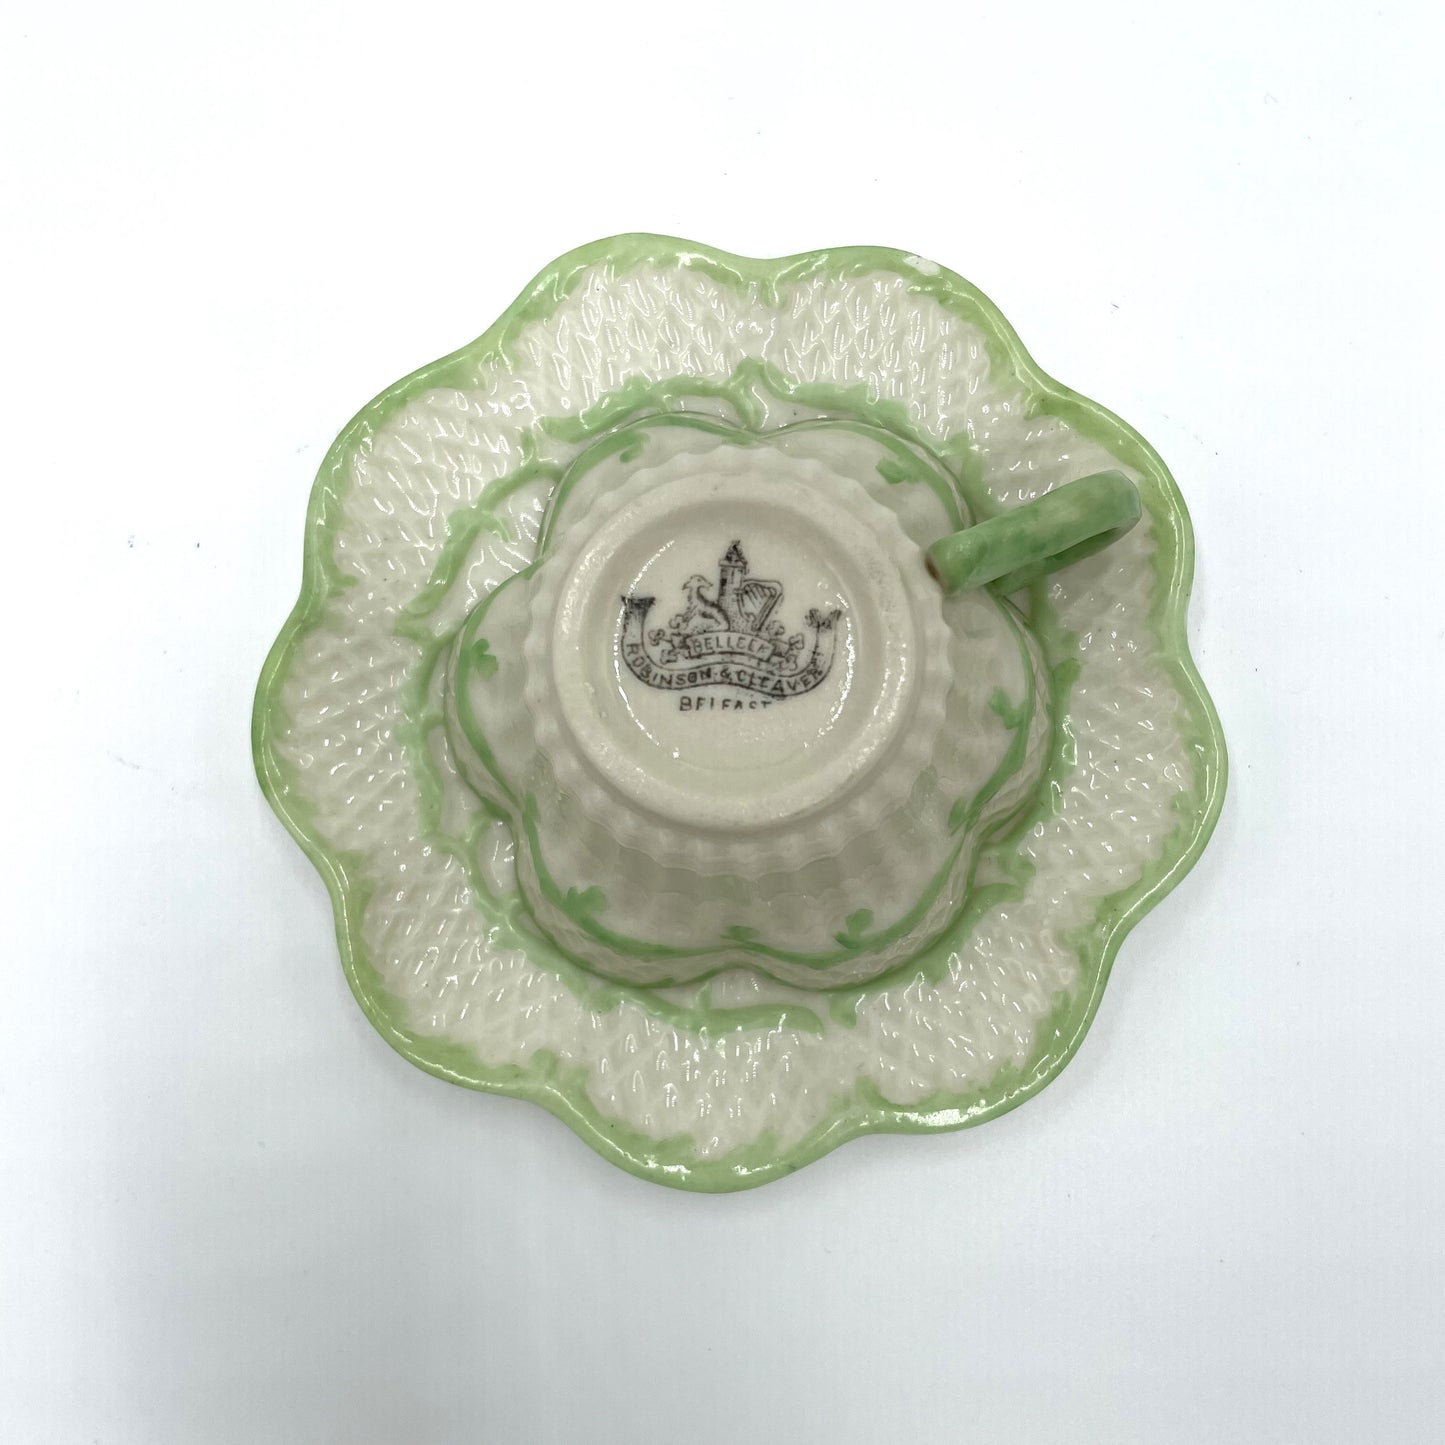 Belleeck Robinson & Cleaver Cup and Saucer